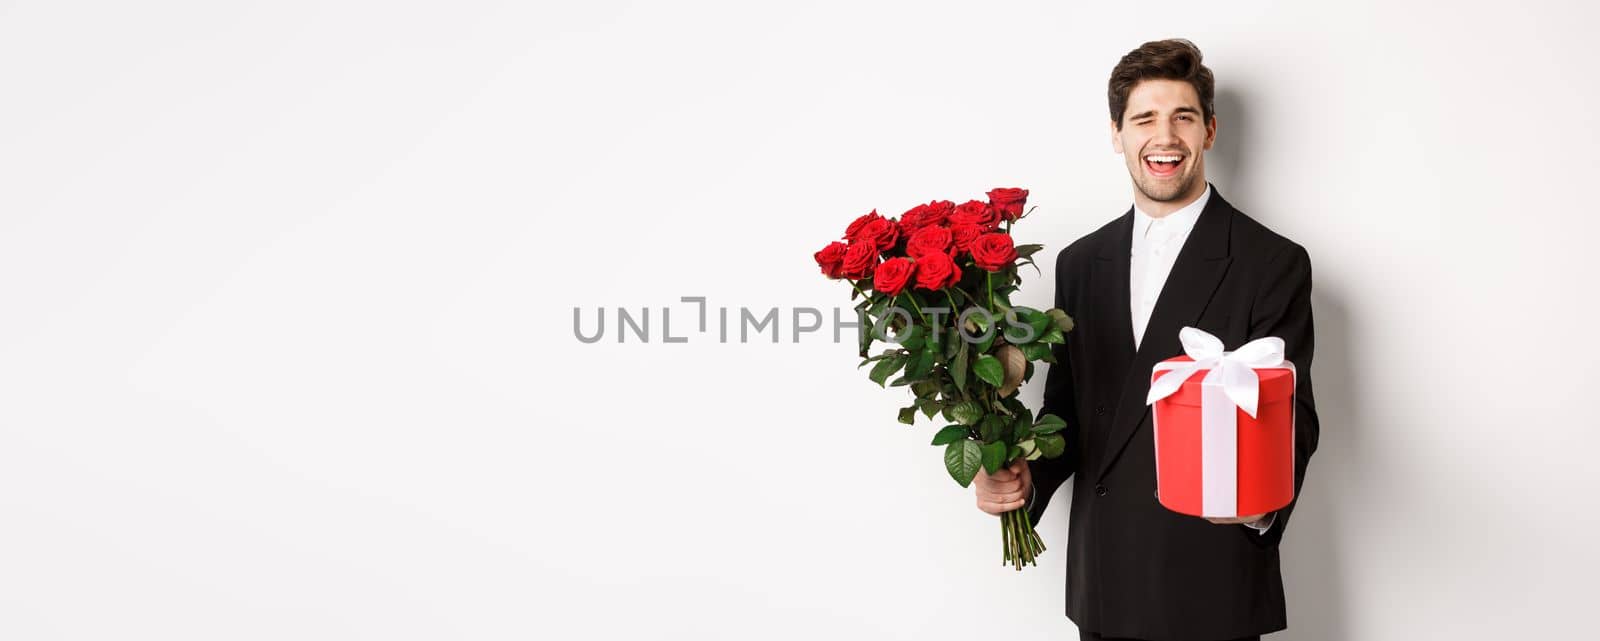 Concept of holidays, relationship and celebration. Charming young man in black suit, holding gift box and bouquet of roses, winking and smiling, standing against white background.